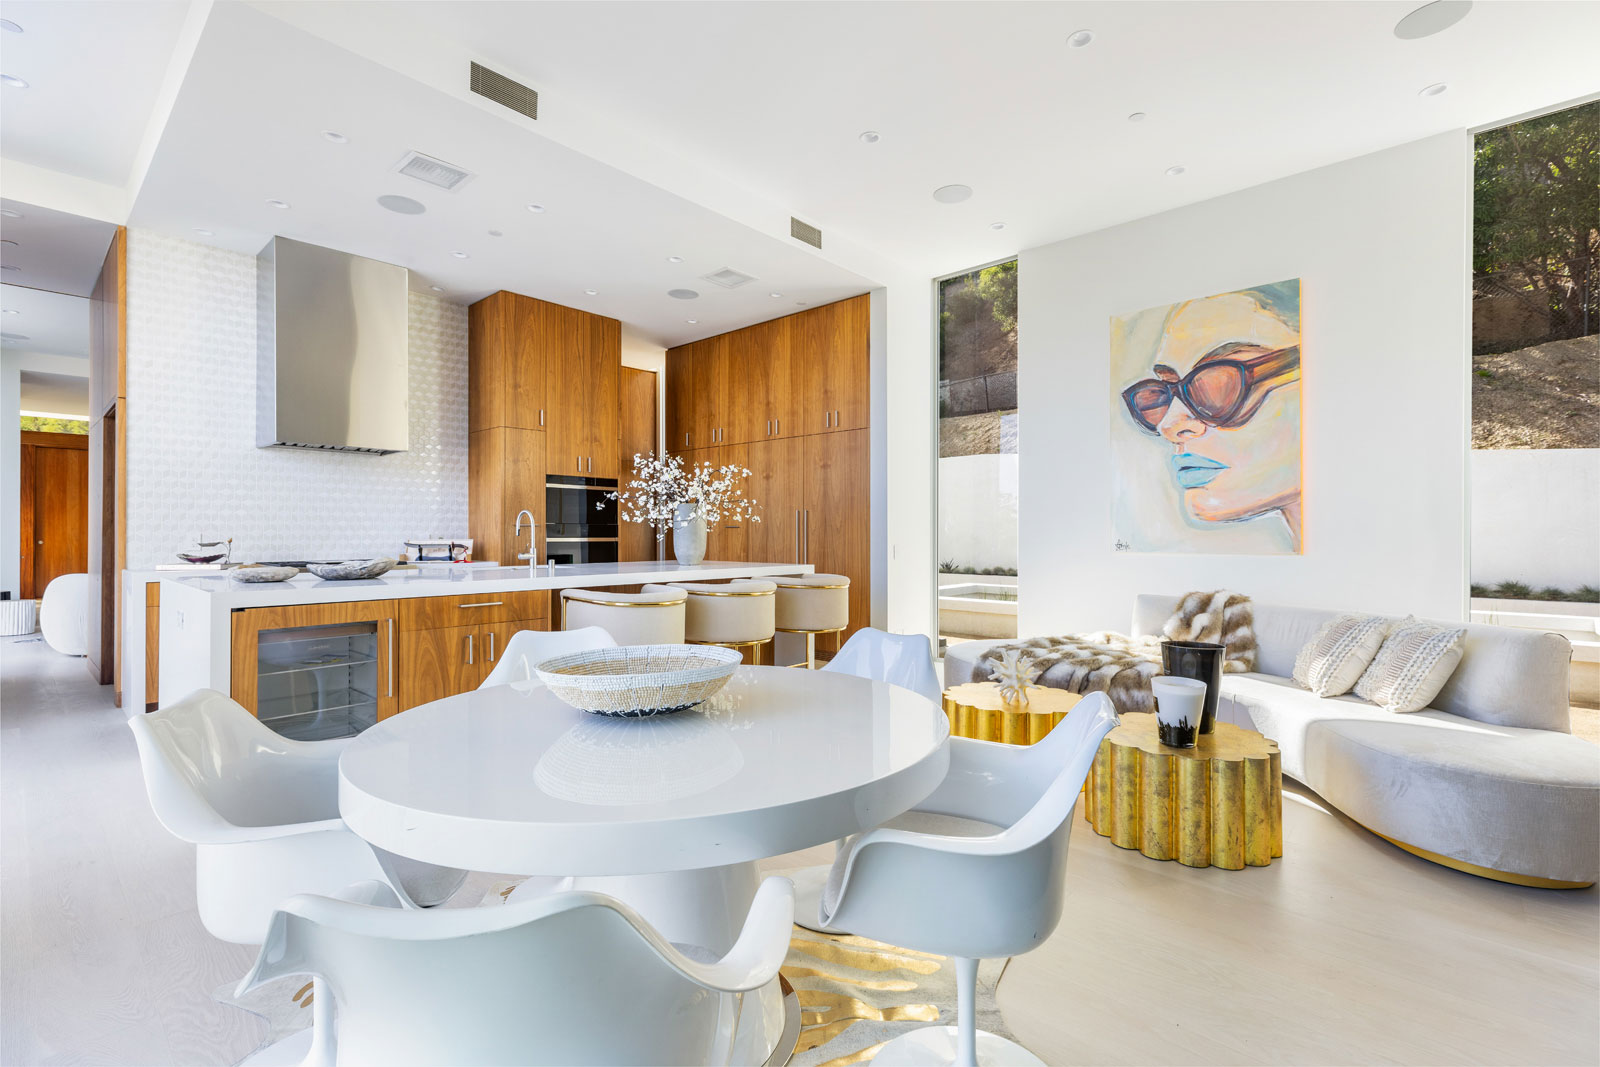 The kitchen with Wolf & Subzero appliances and a backsplash by Heath Ceramics. Photo: © Anthony Barcelo, Barcelo Photography